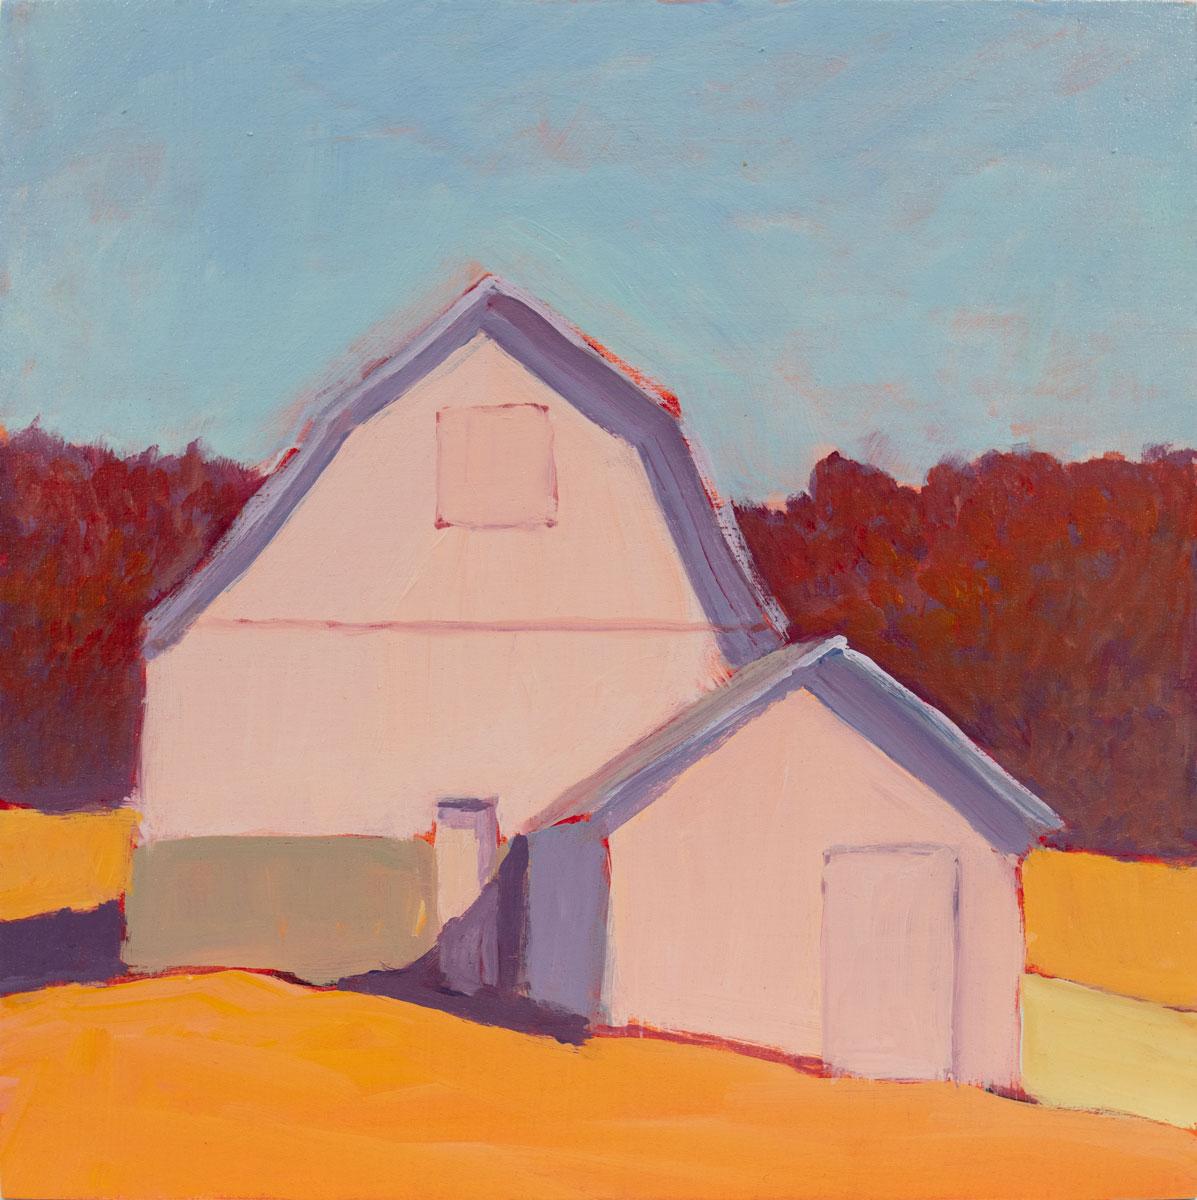 This small contemporary rural landscape painting by Carol Young features a lightly abstract scene of a barn and a warm pink, orange, and red palette. The painting is broken into simplified blocks of color, capturing the warmth of the sun shining on